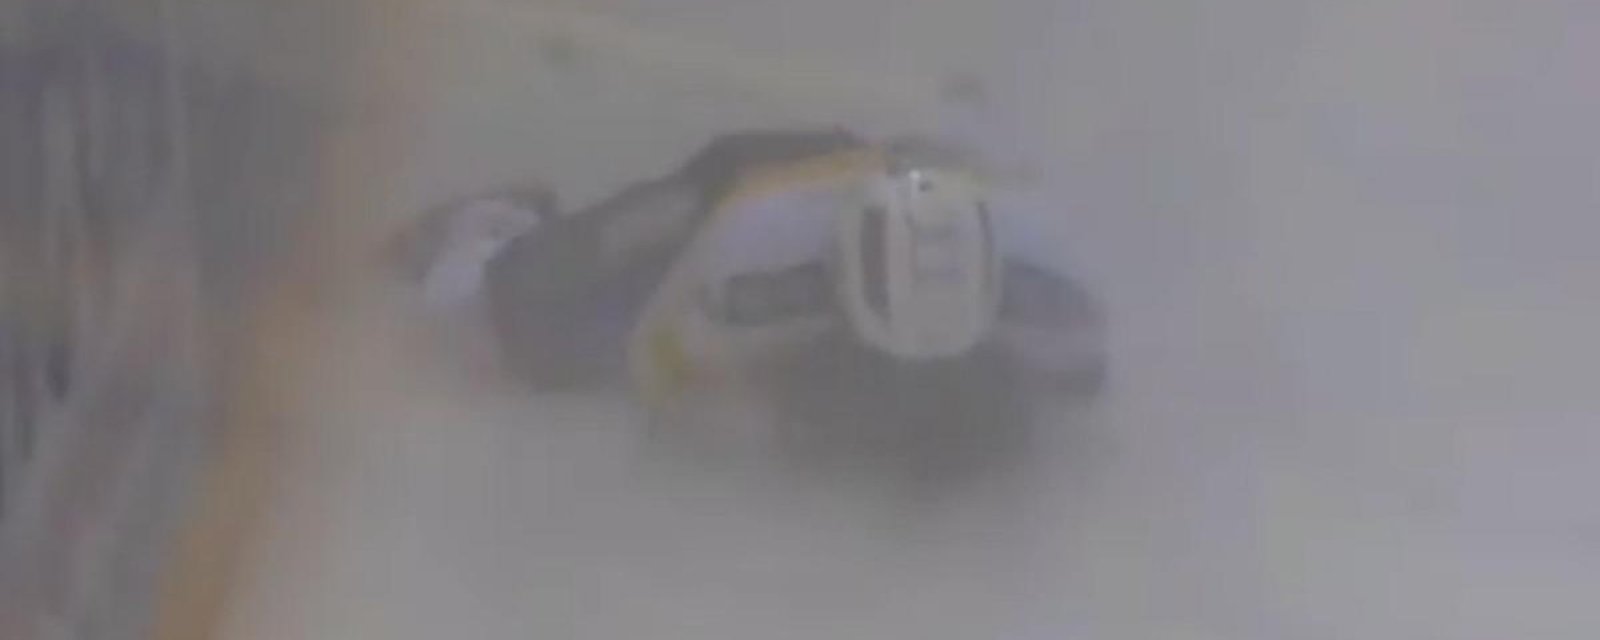 Former NHLer takes out his opponent with a slash to the face.